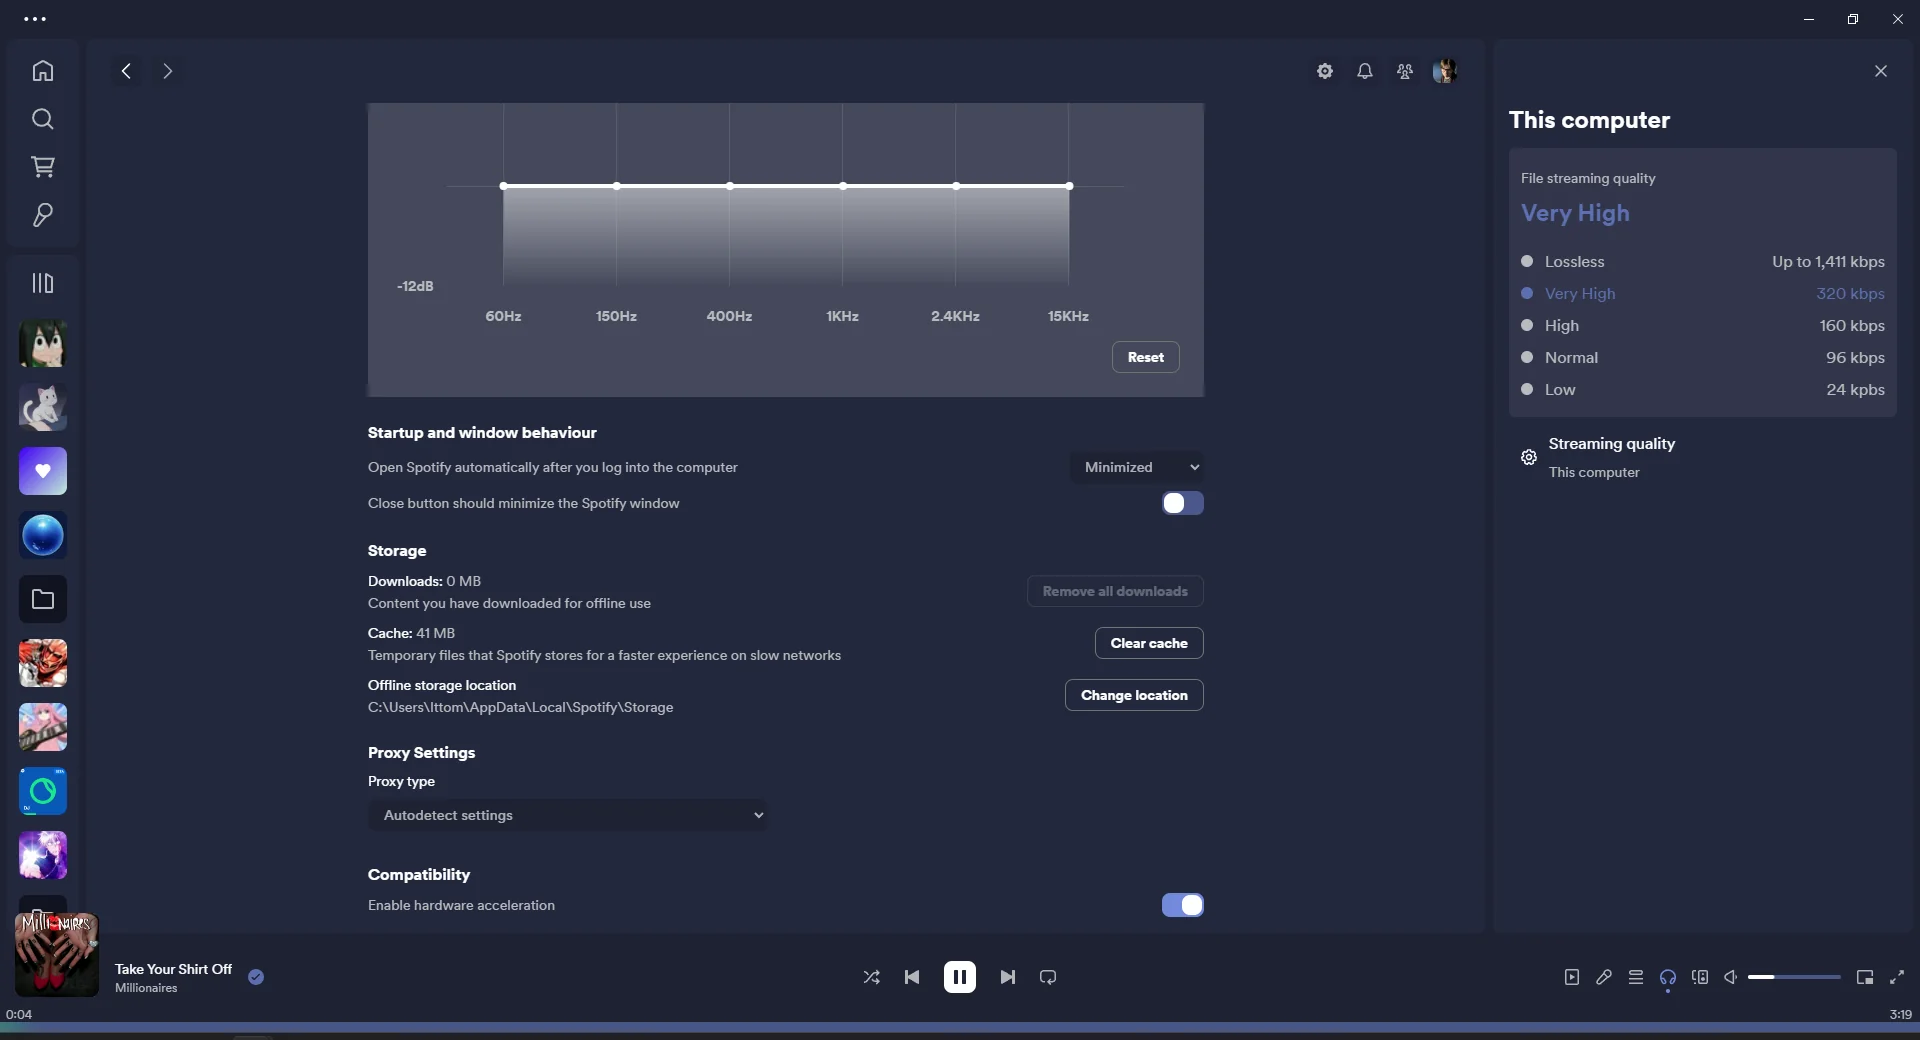 Screenshot of the Spotify desktop app settings menu, displaying audio settings including an equalizer adjustment from 60Hz to 15kHz, storage options, proxy settings, and file streaming quality choices ranging from low to lossless